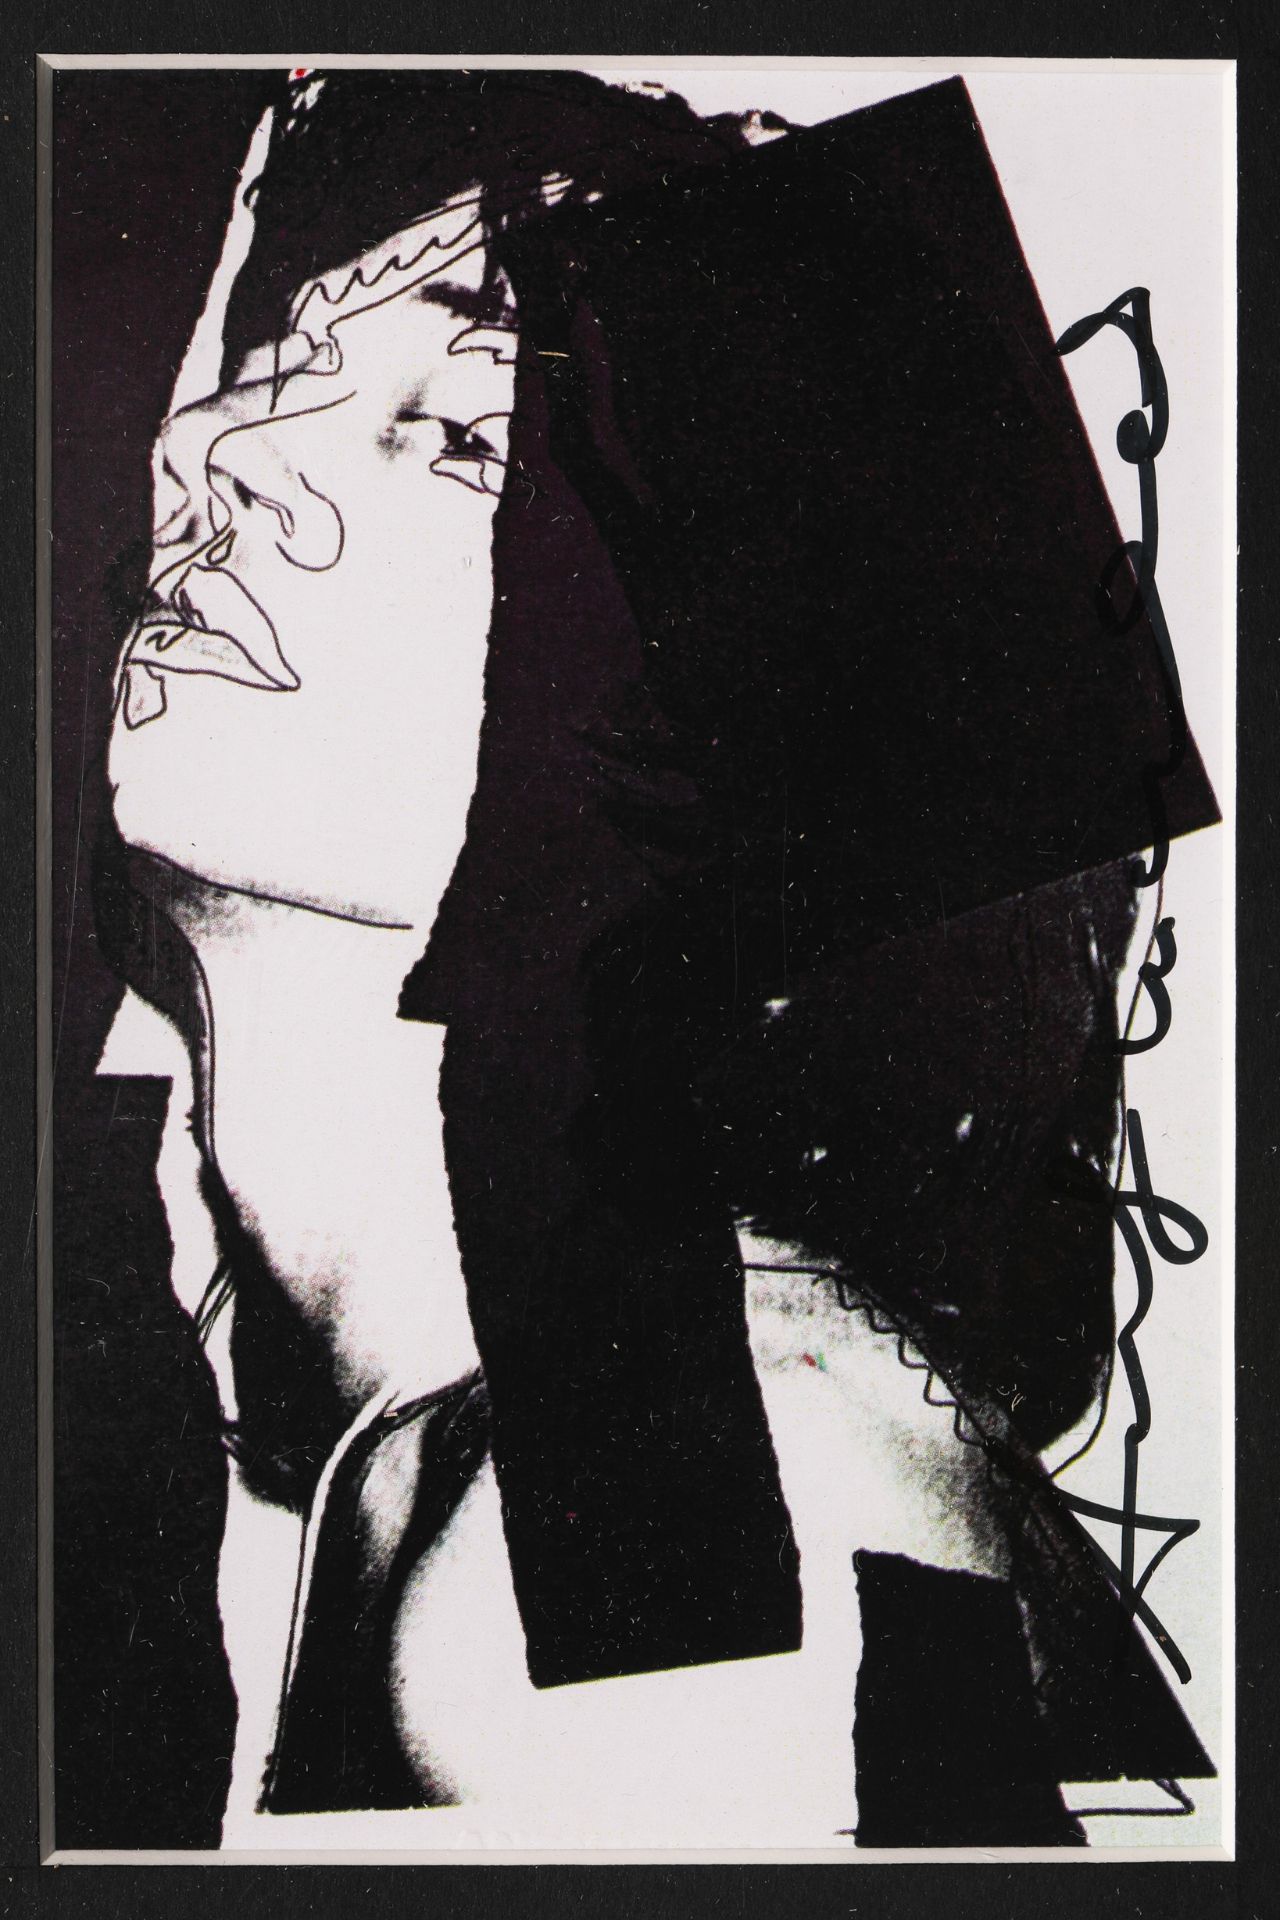 Andy Warhol, Mini Portfolio Mick Jagger with 10 Prints, 1975, signed - Image 8 of 16